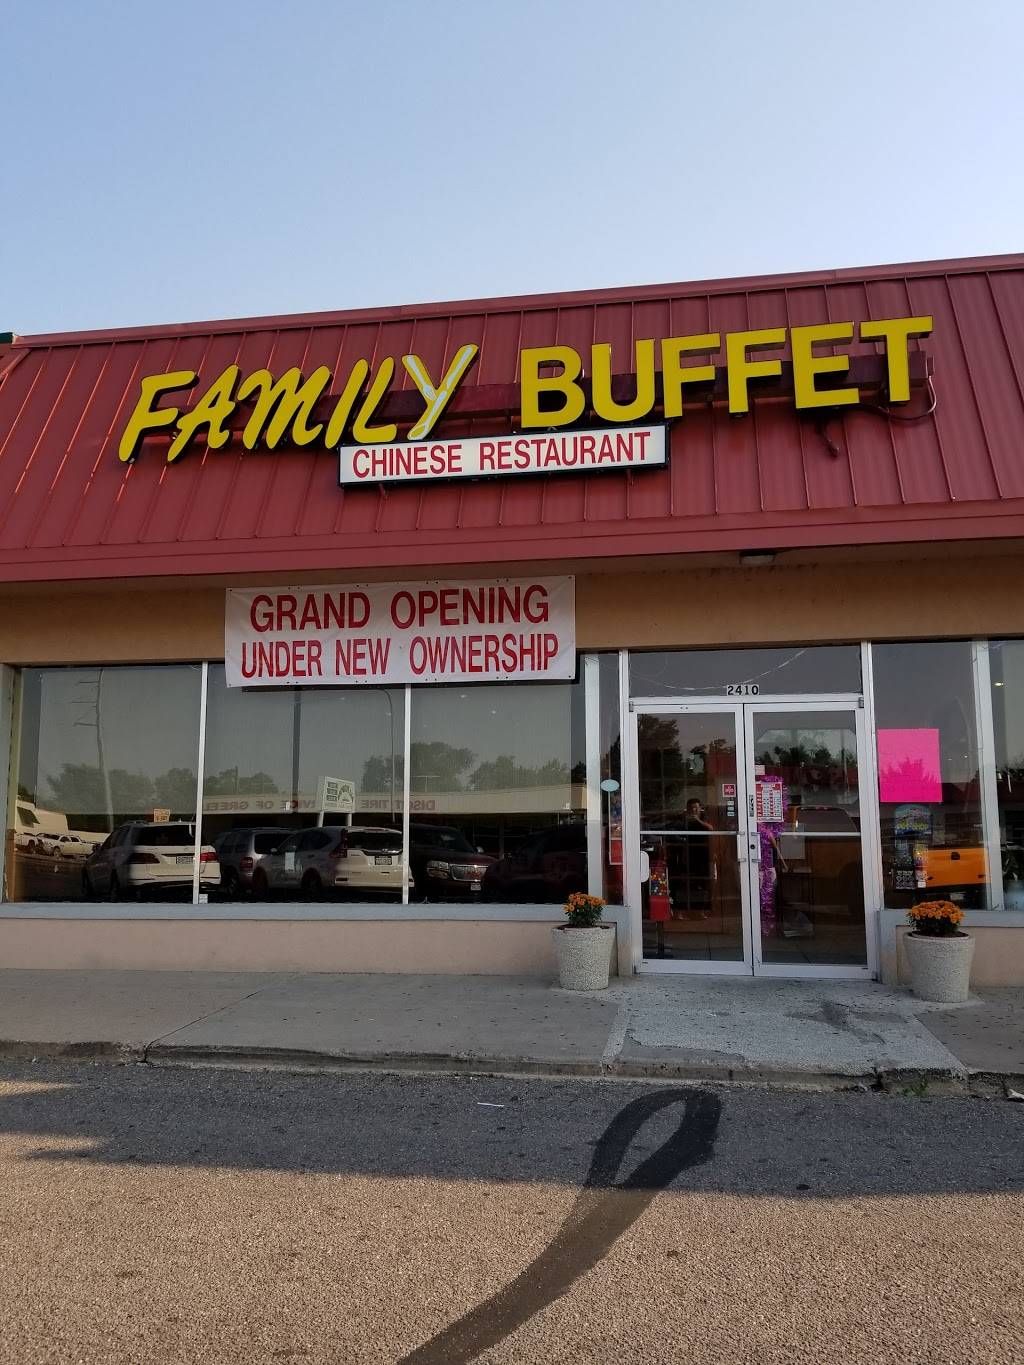 Family Buffet | restaurant | 2410 W 10th St, Greeley, CO 80634, USA | 9703369888 OR +1 970-336-9888